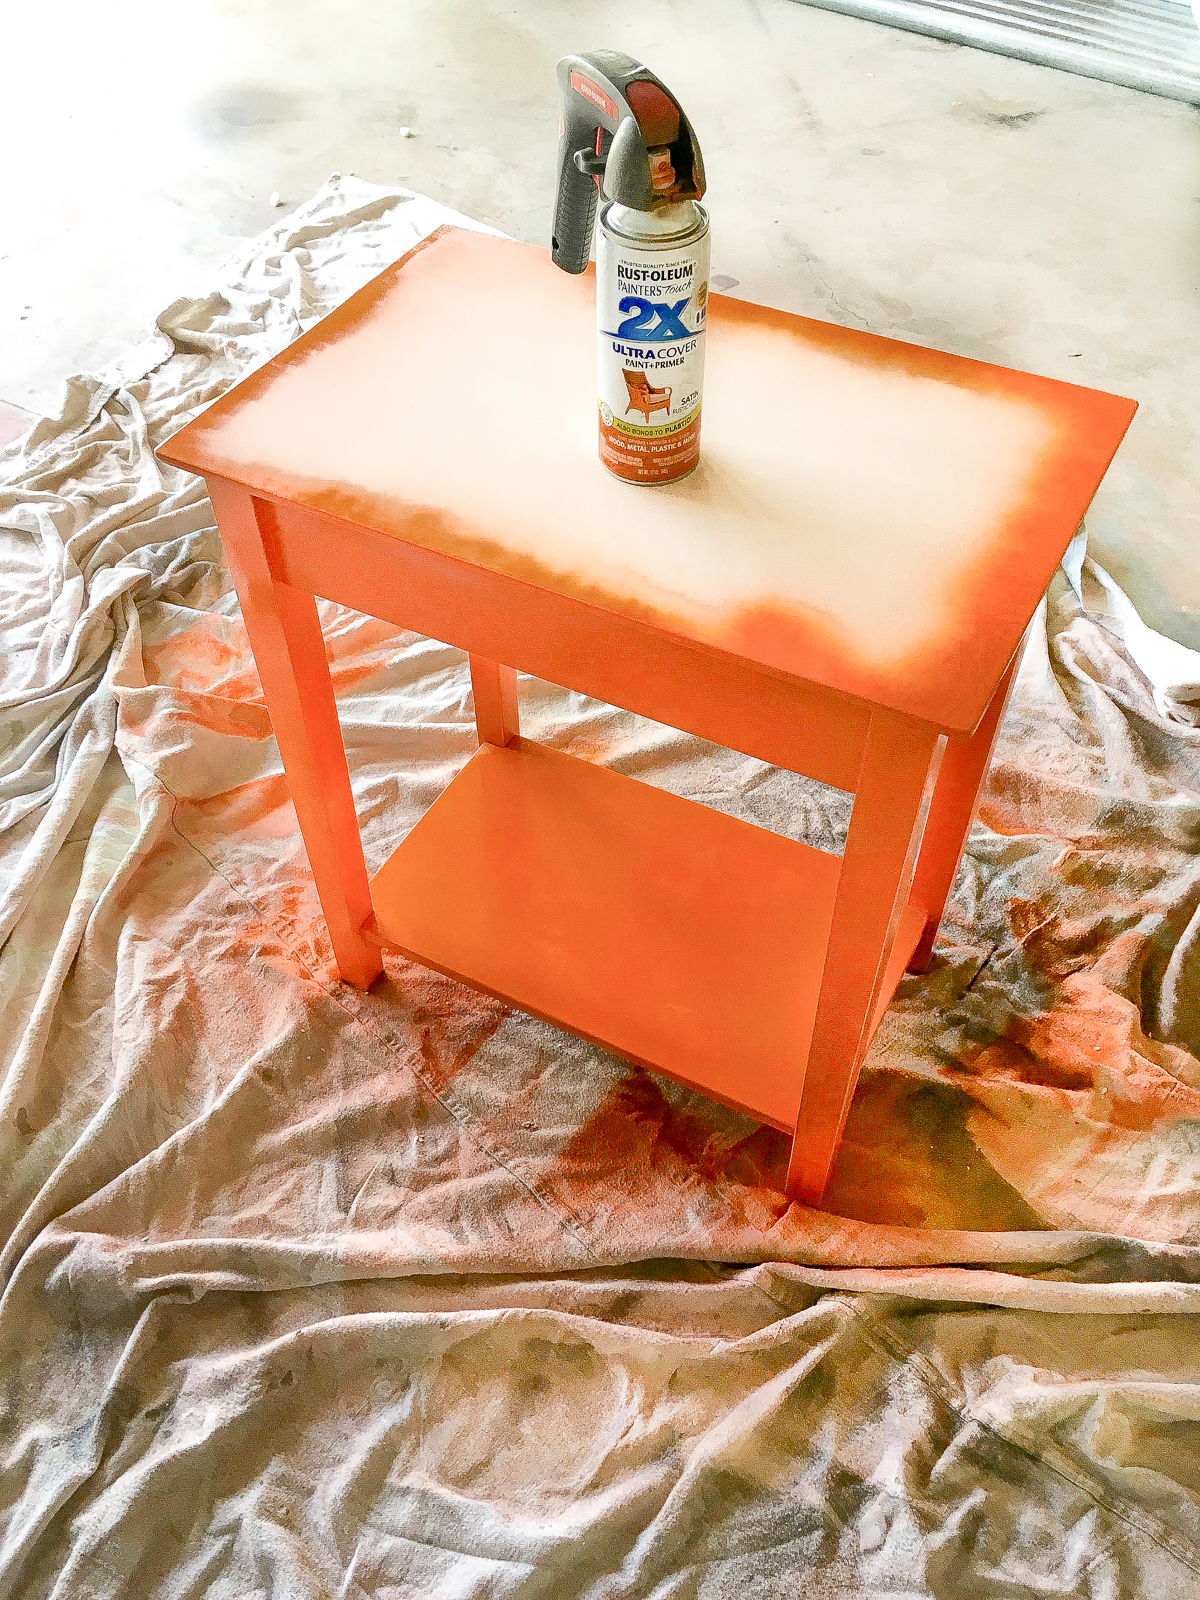 Find out when to use primer spray paint